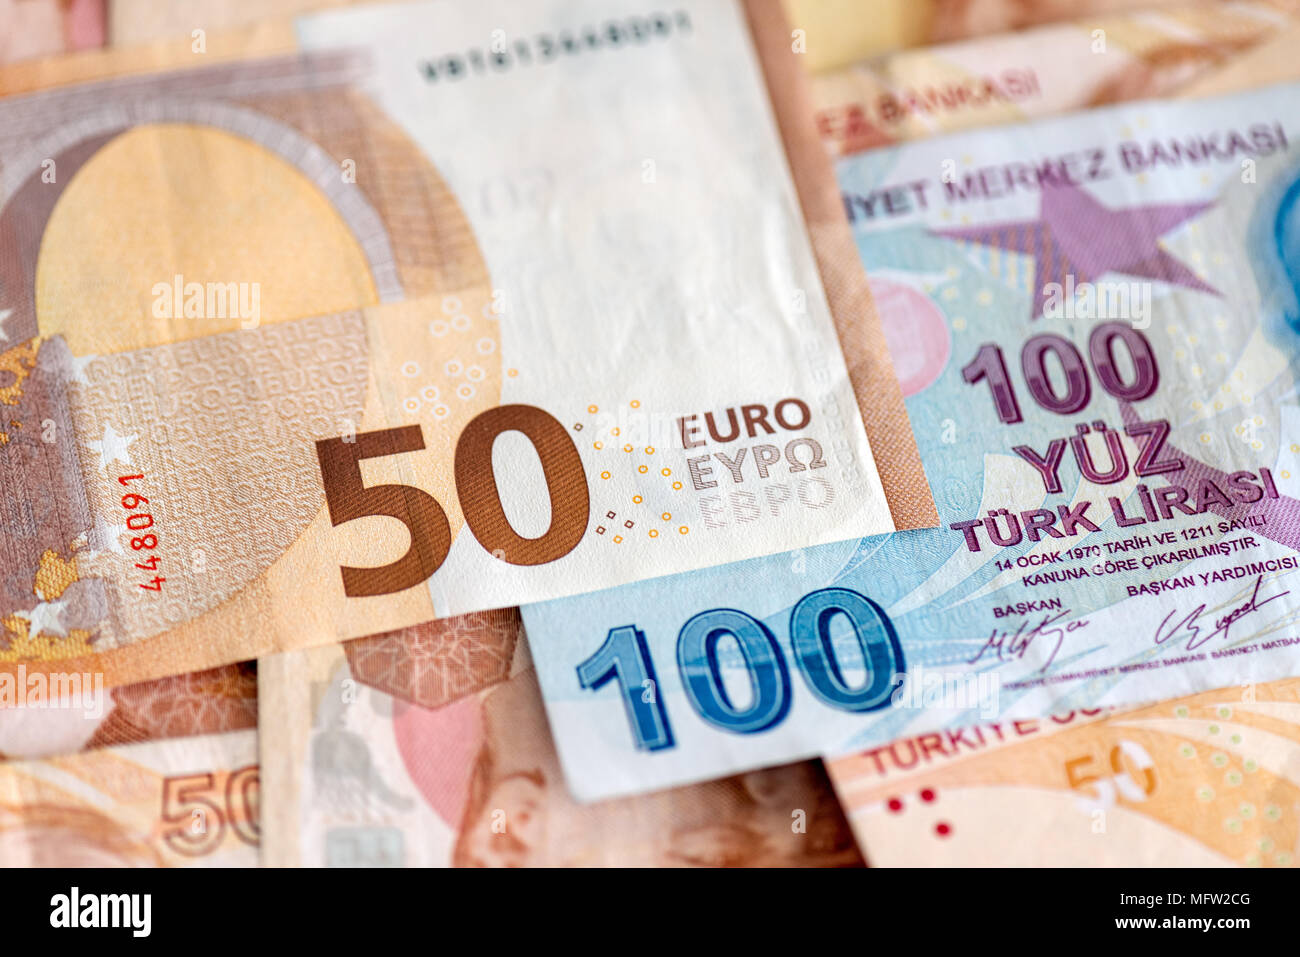 Turkish and European currency - close-up of mixed Lira and Euro banknotes  Stock Photo - Alamy